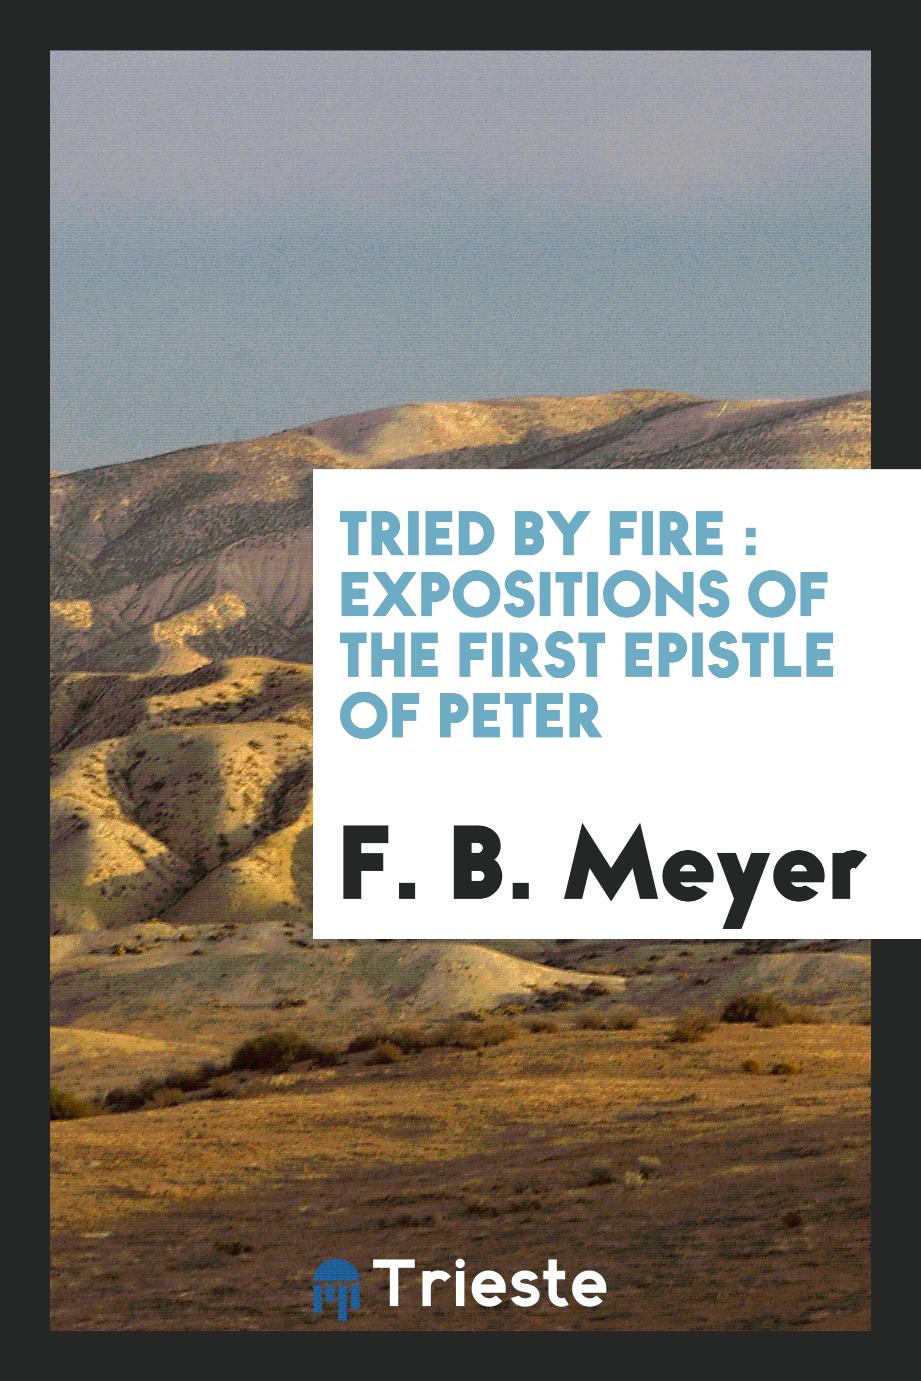 Tried by fire : expositions of the first Epistle of Peter